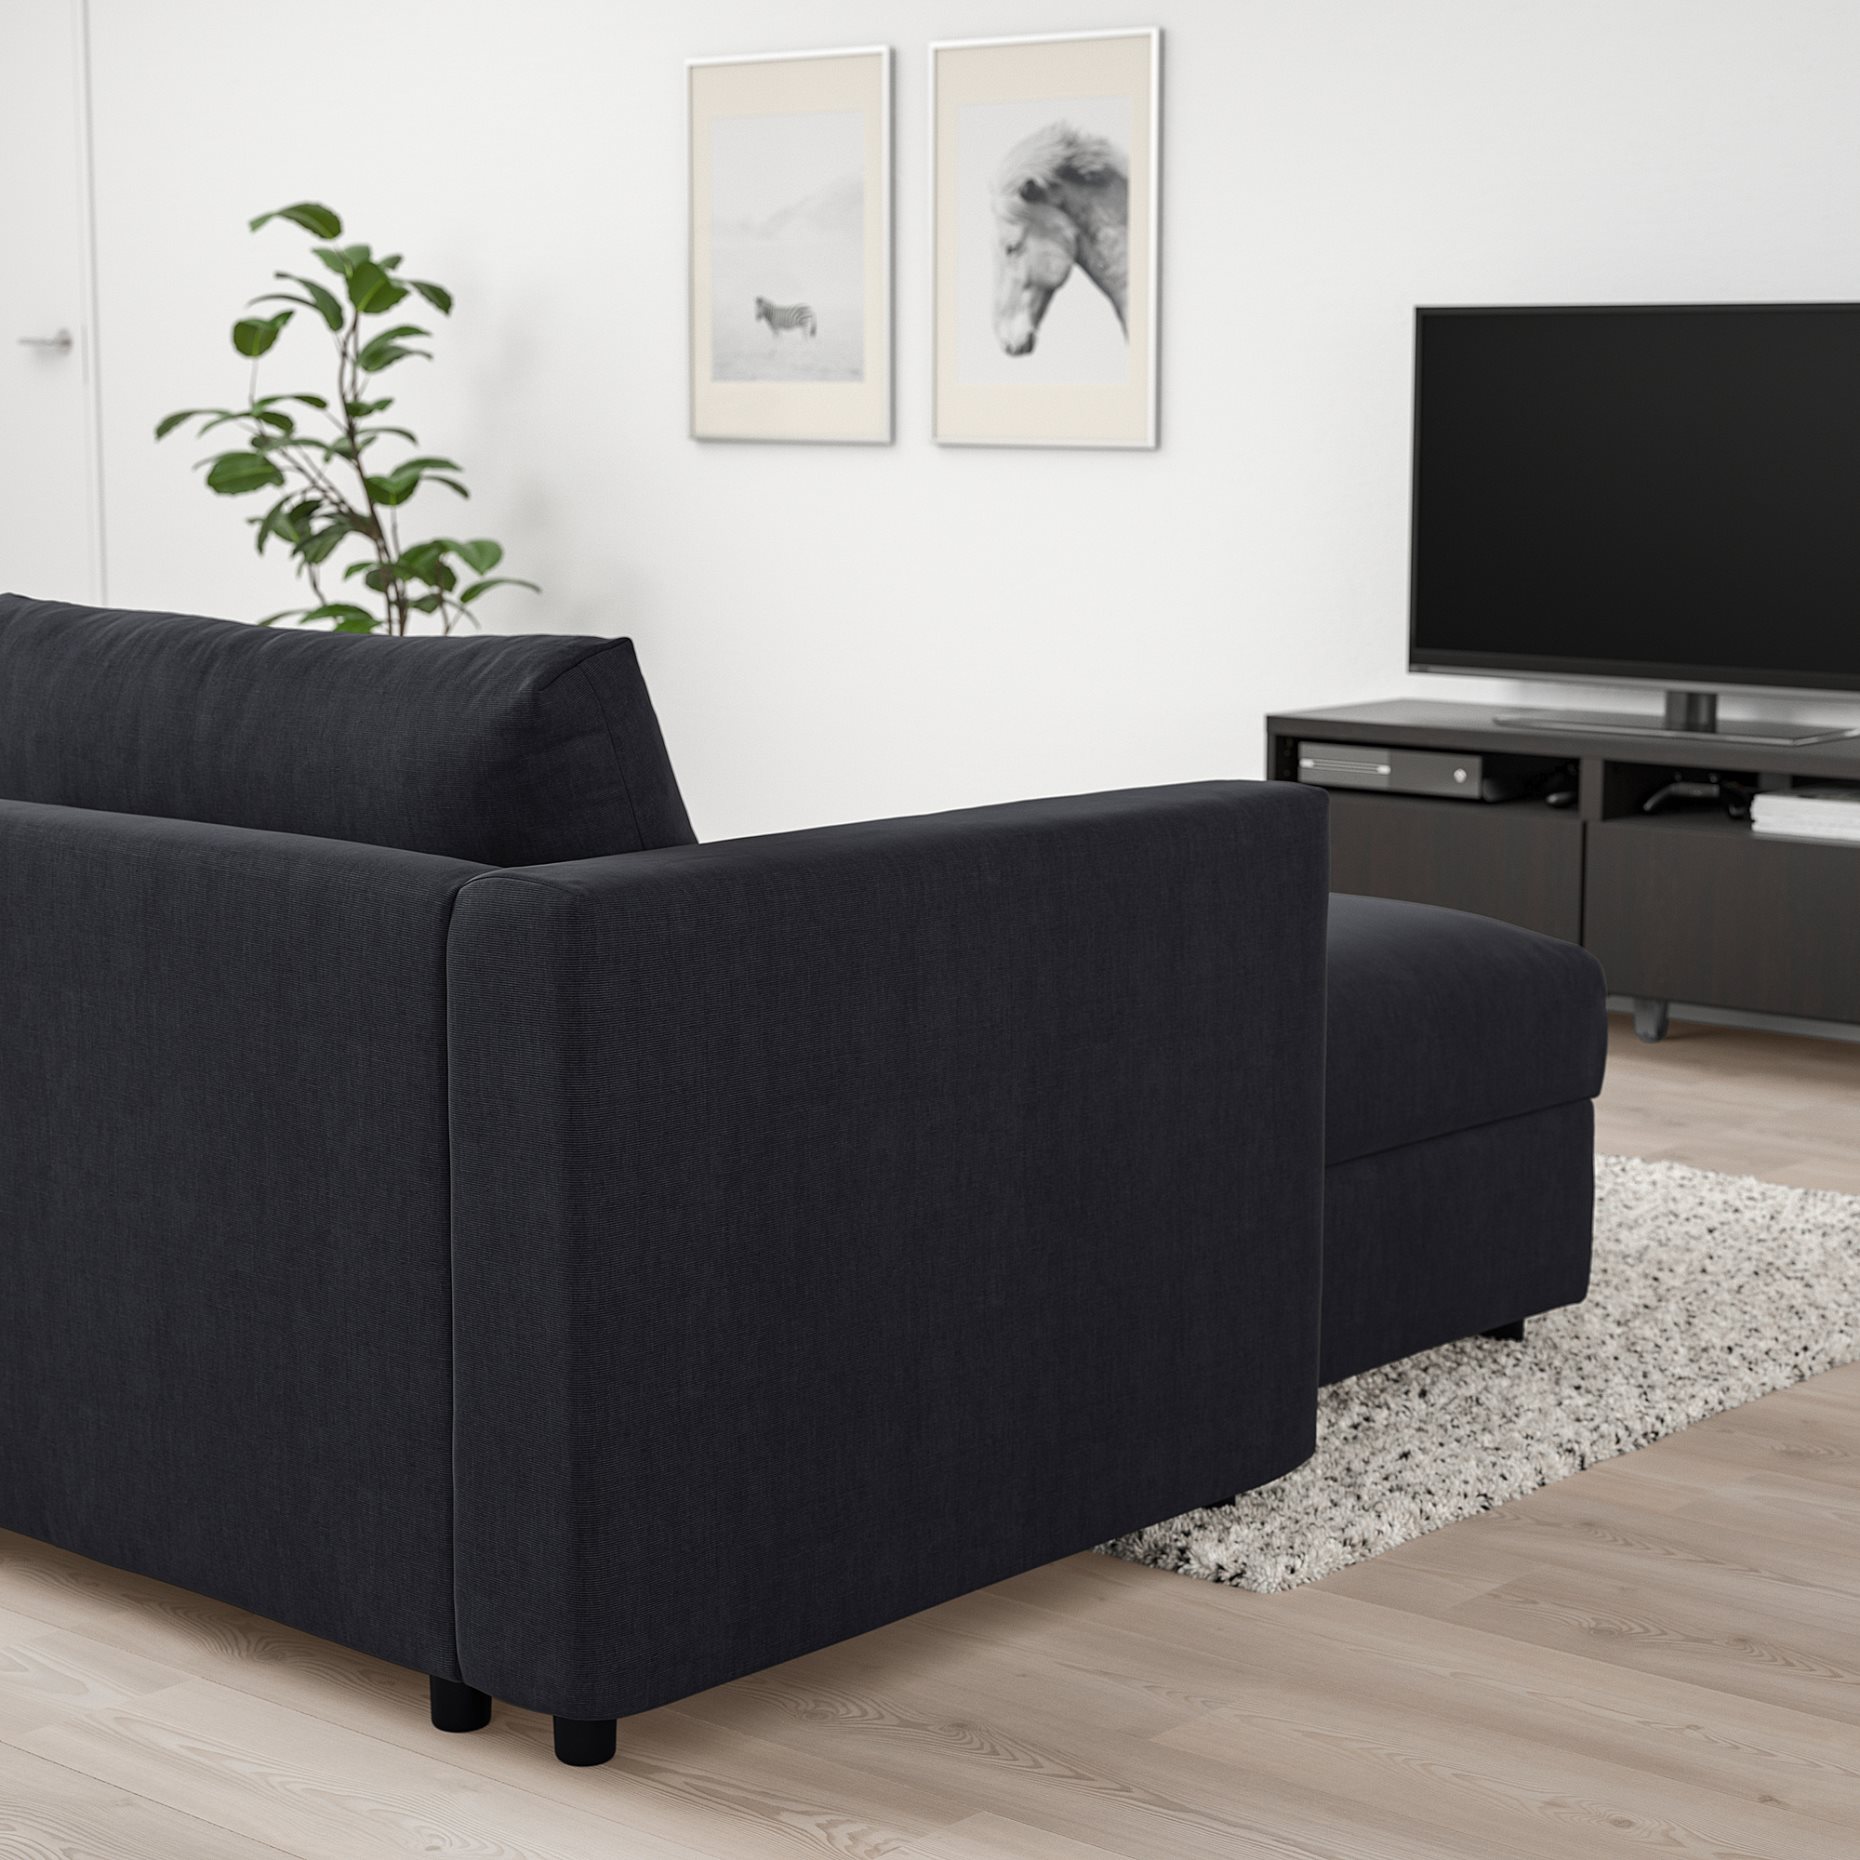 VIMLE, 3-seat sofa-bed with chaise longue, 795.372.15